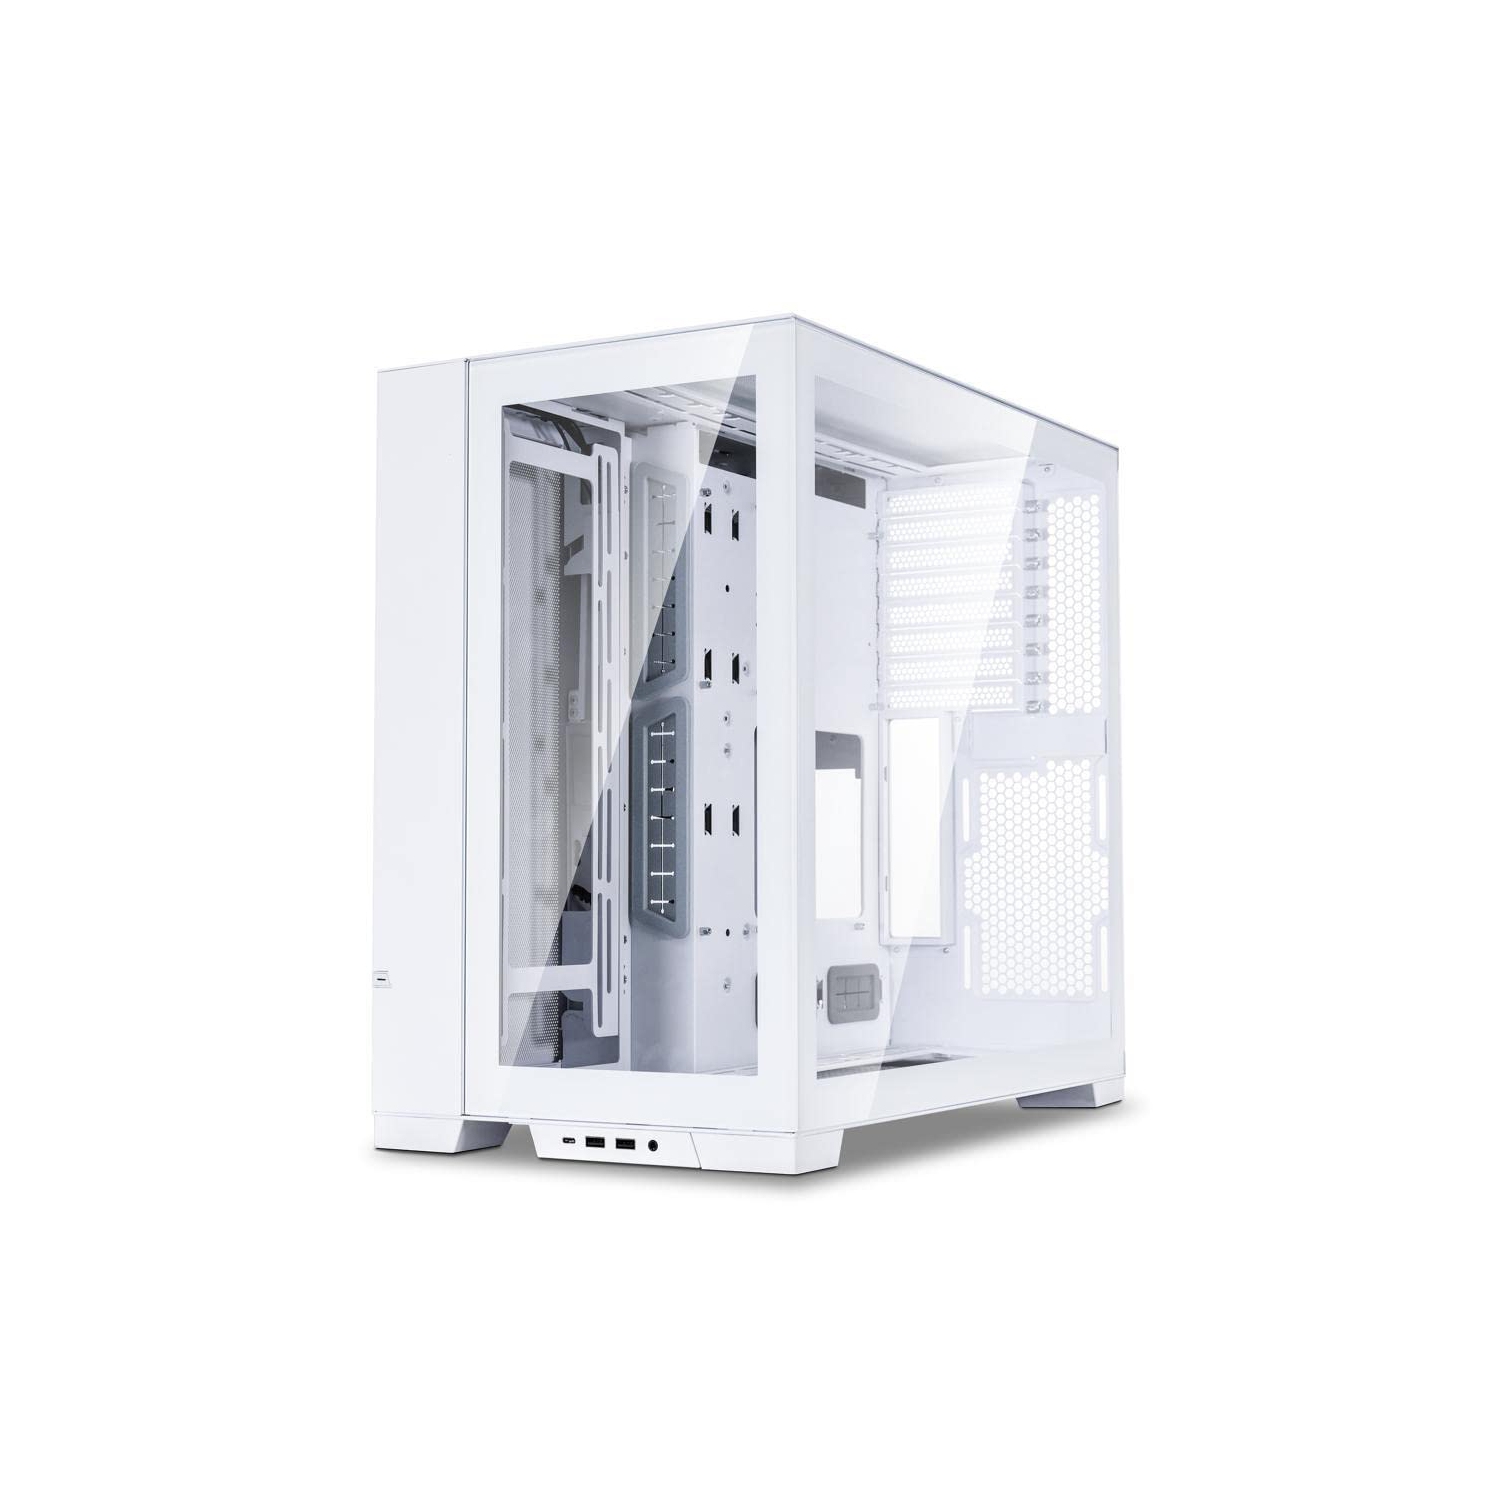 PC-O11 Dynamic EVO Snow White Tempered Glass on The Front and Left Side, Chassis Body SECC ATX Full Tower Gaming Computer Case - PC-O11DEW